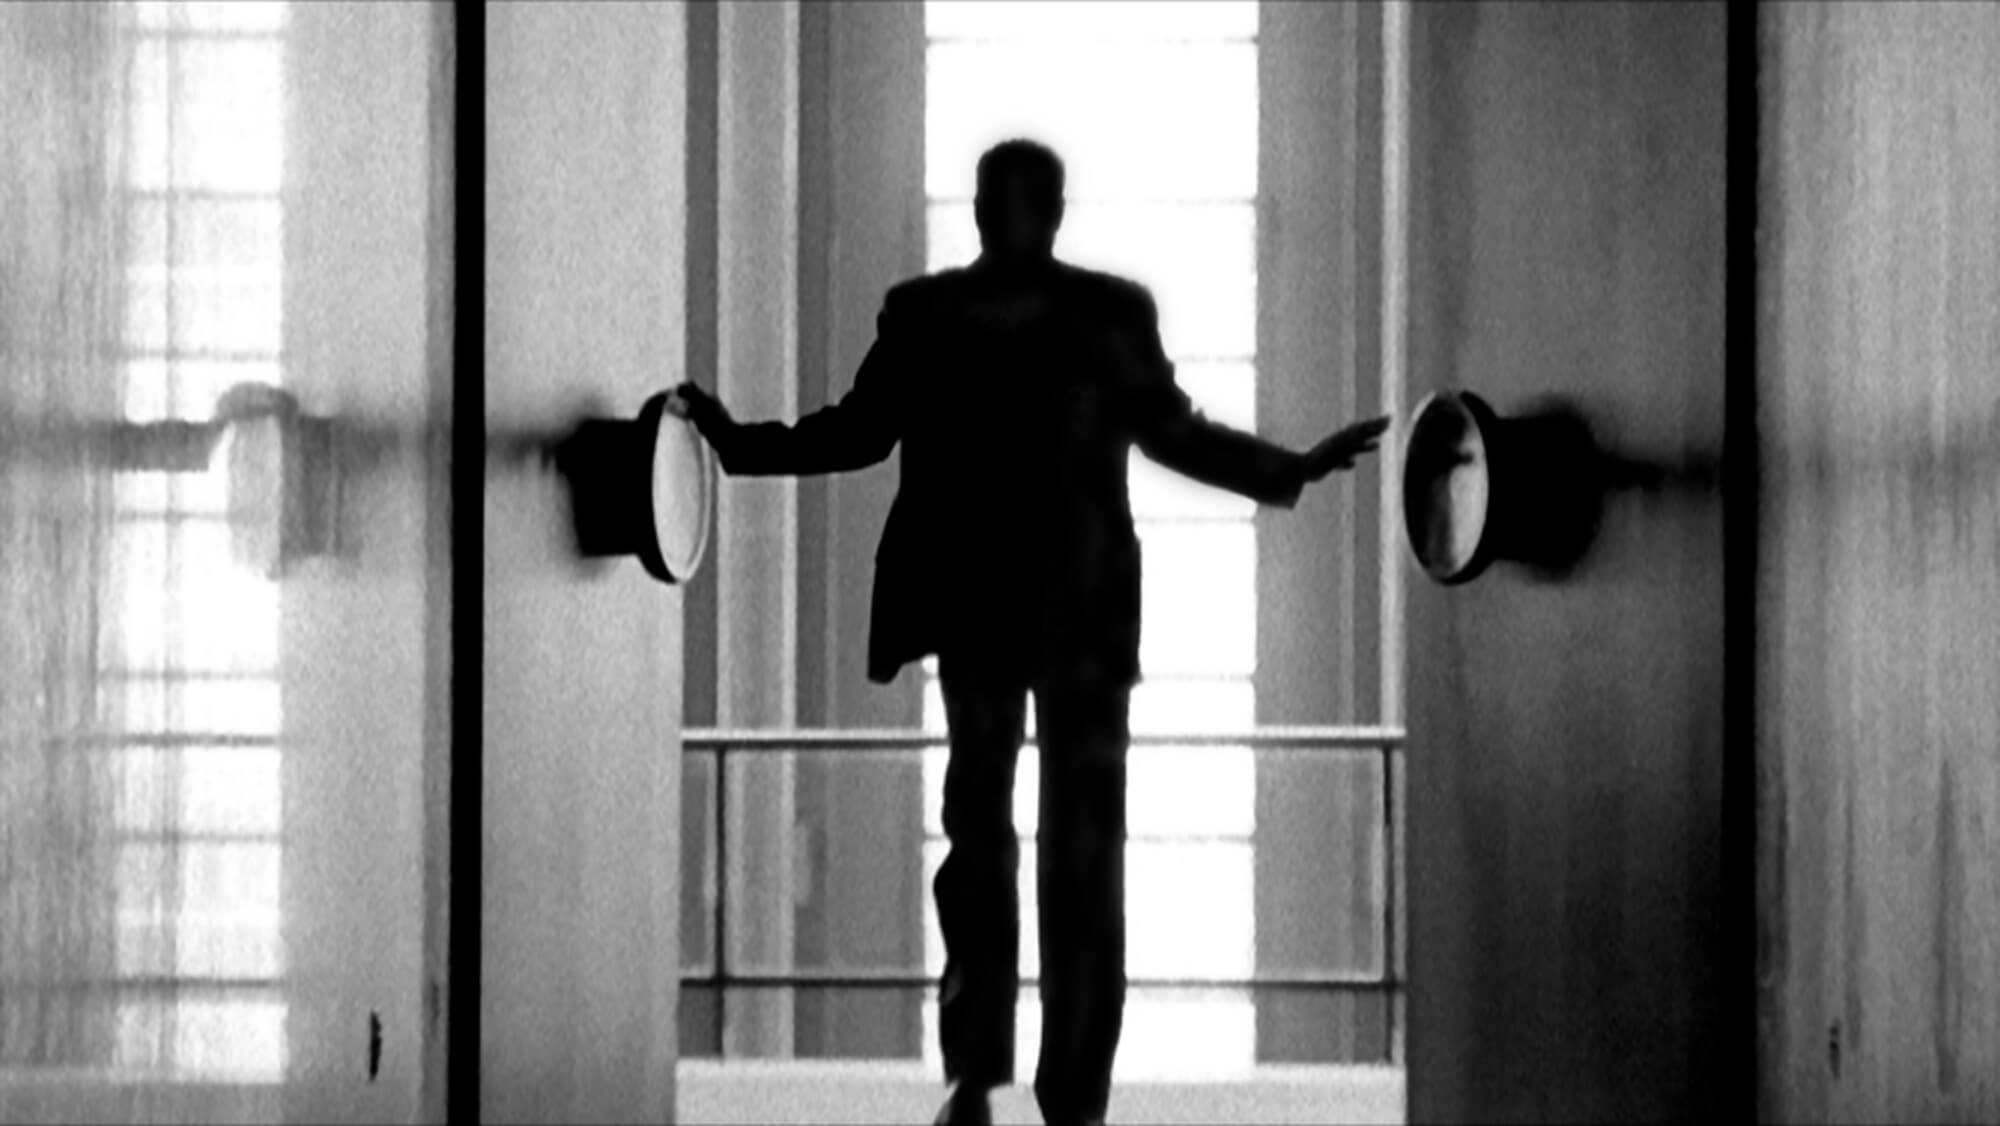 Still from Watchers of the Sky. A man in a suit stands in between two doors with large, circular knobs facing away from the camera. The man is blurry, and out of focus.